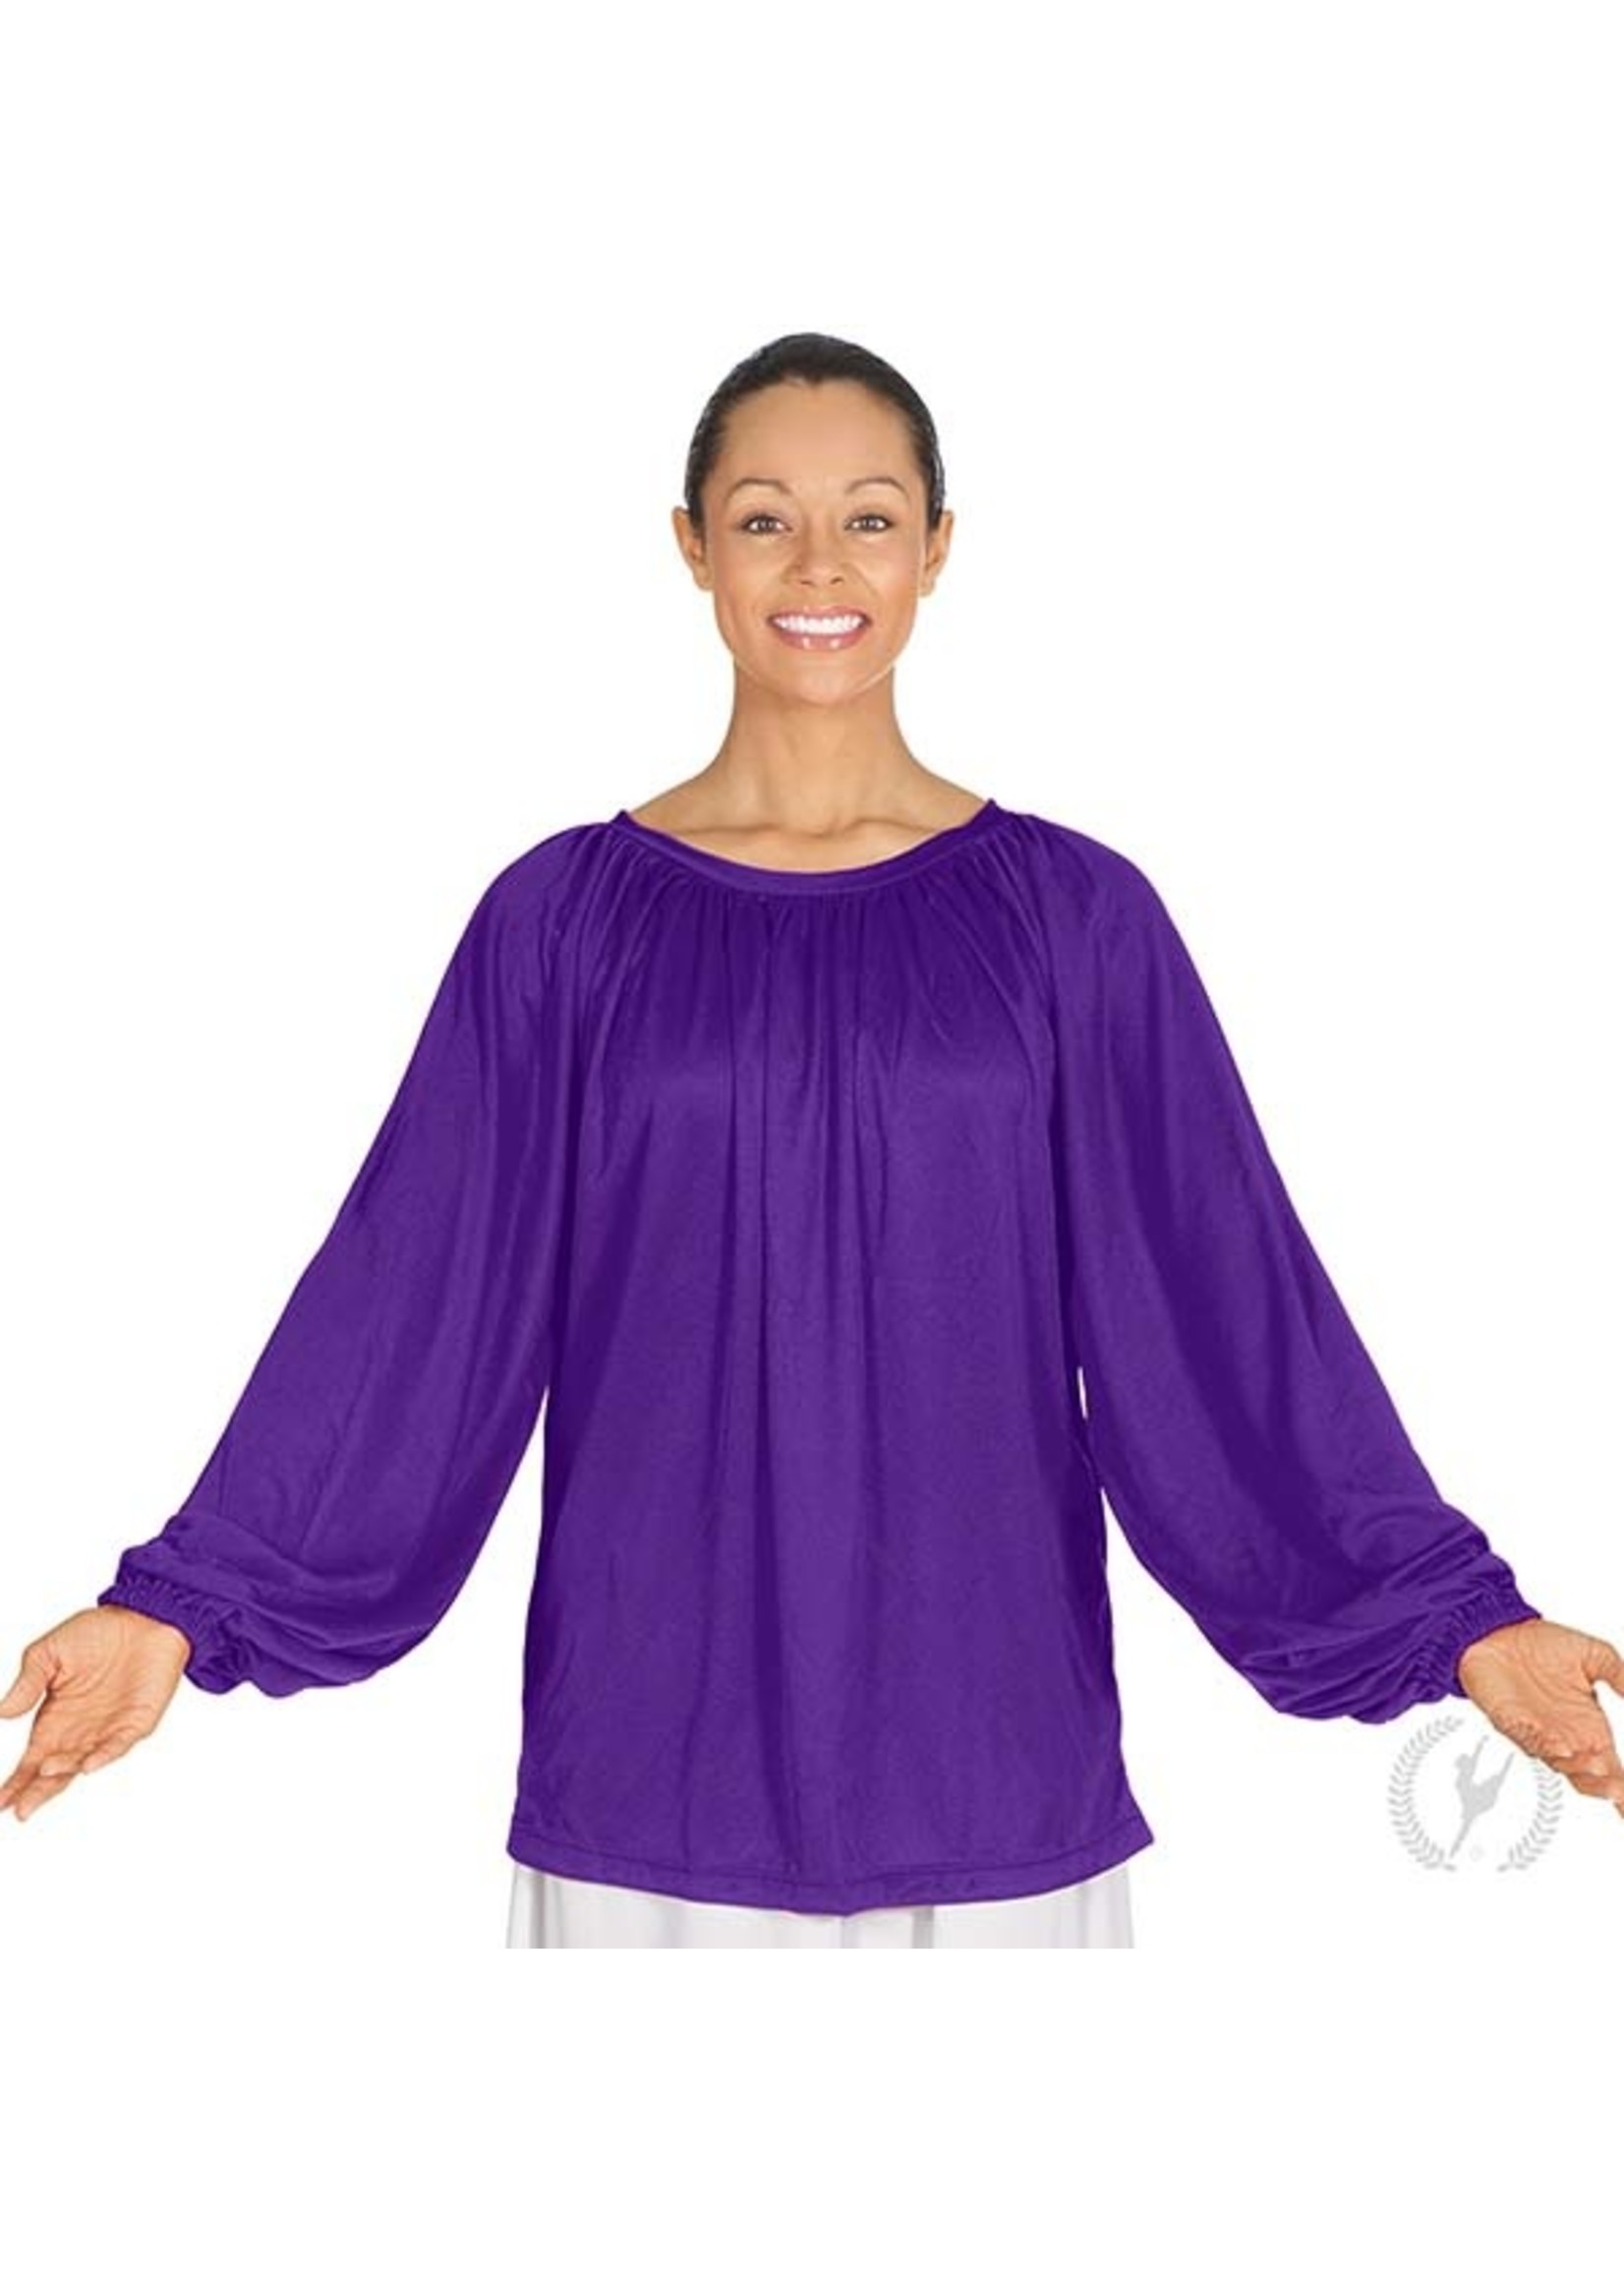 Gathered Loose Fit Praise Top